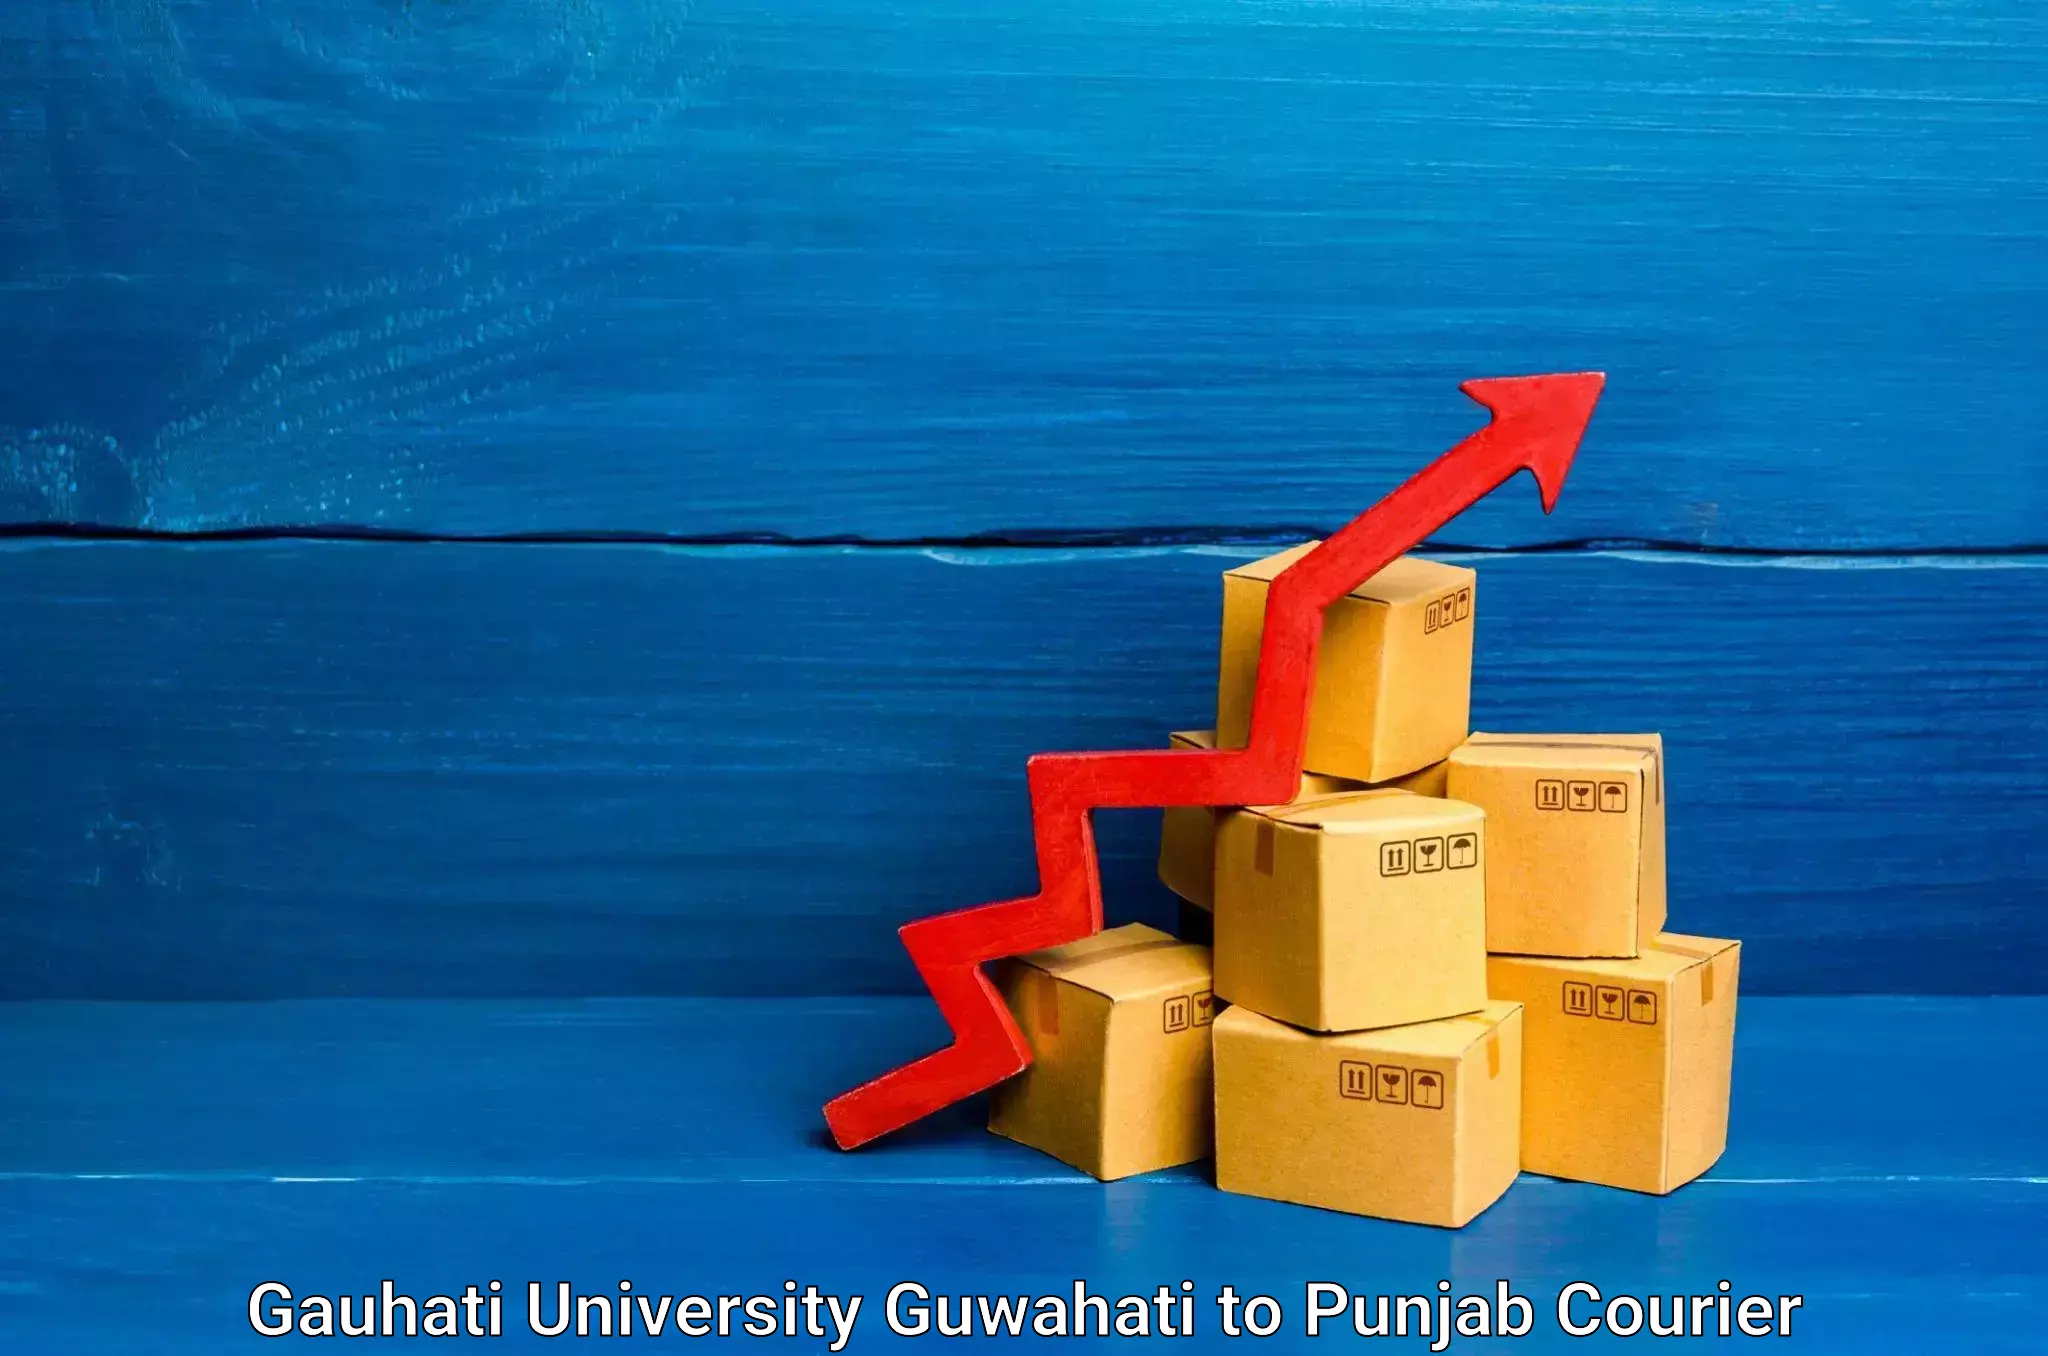 Global parcel delivery in Gauhati University Guwahati to Mohali